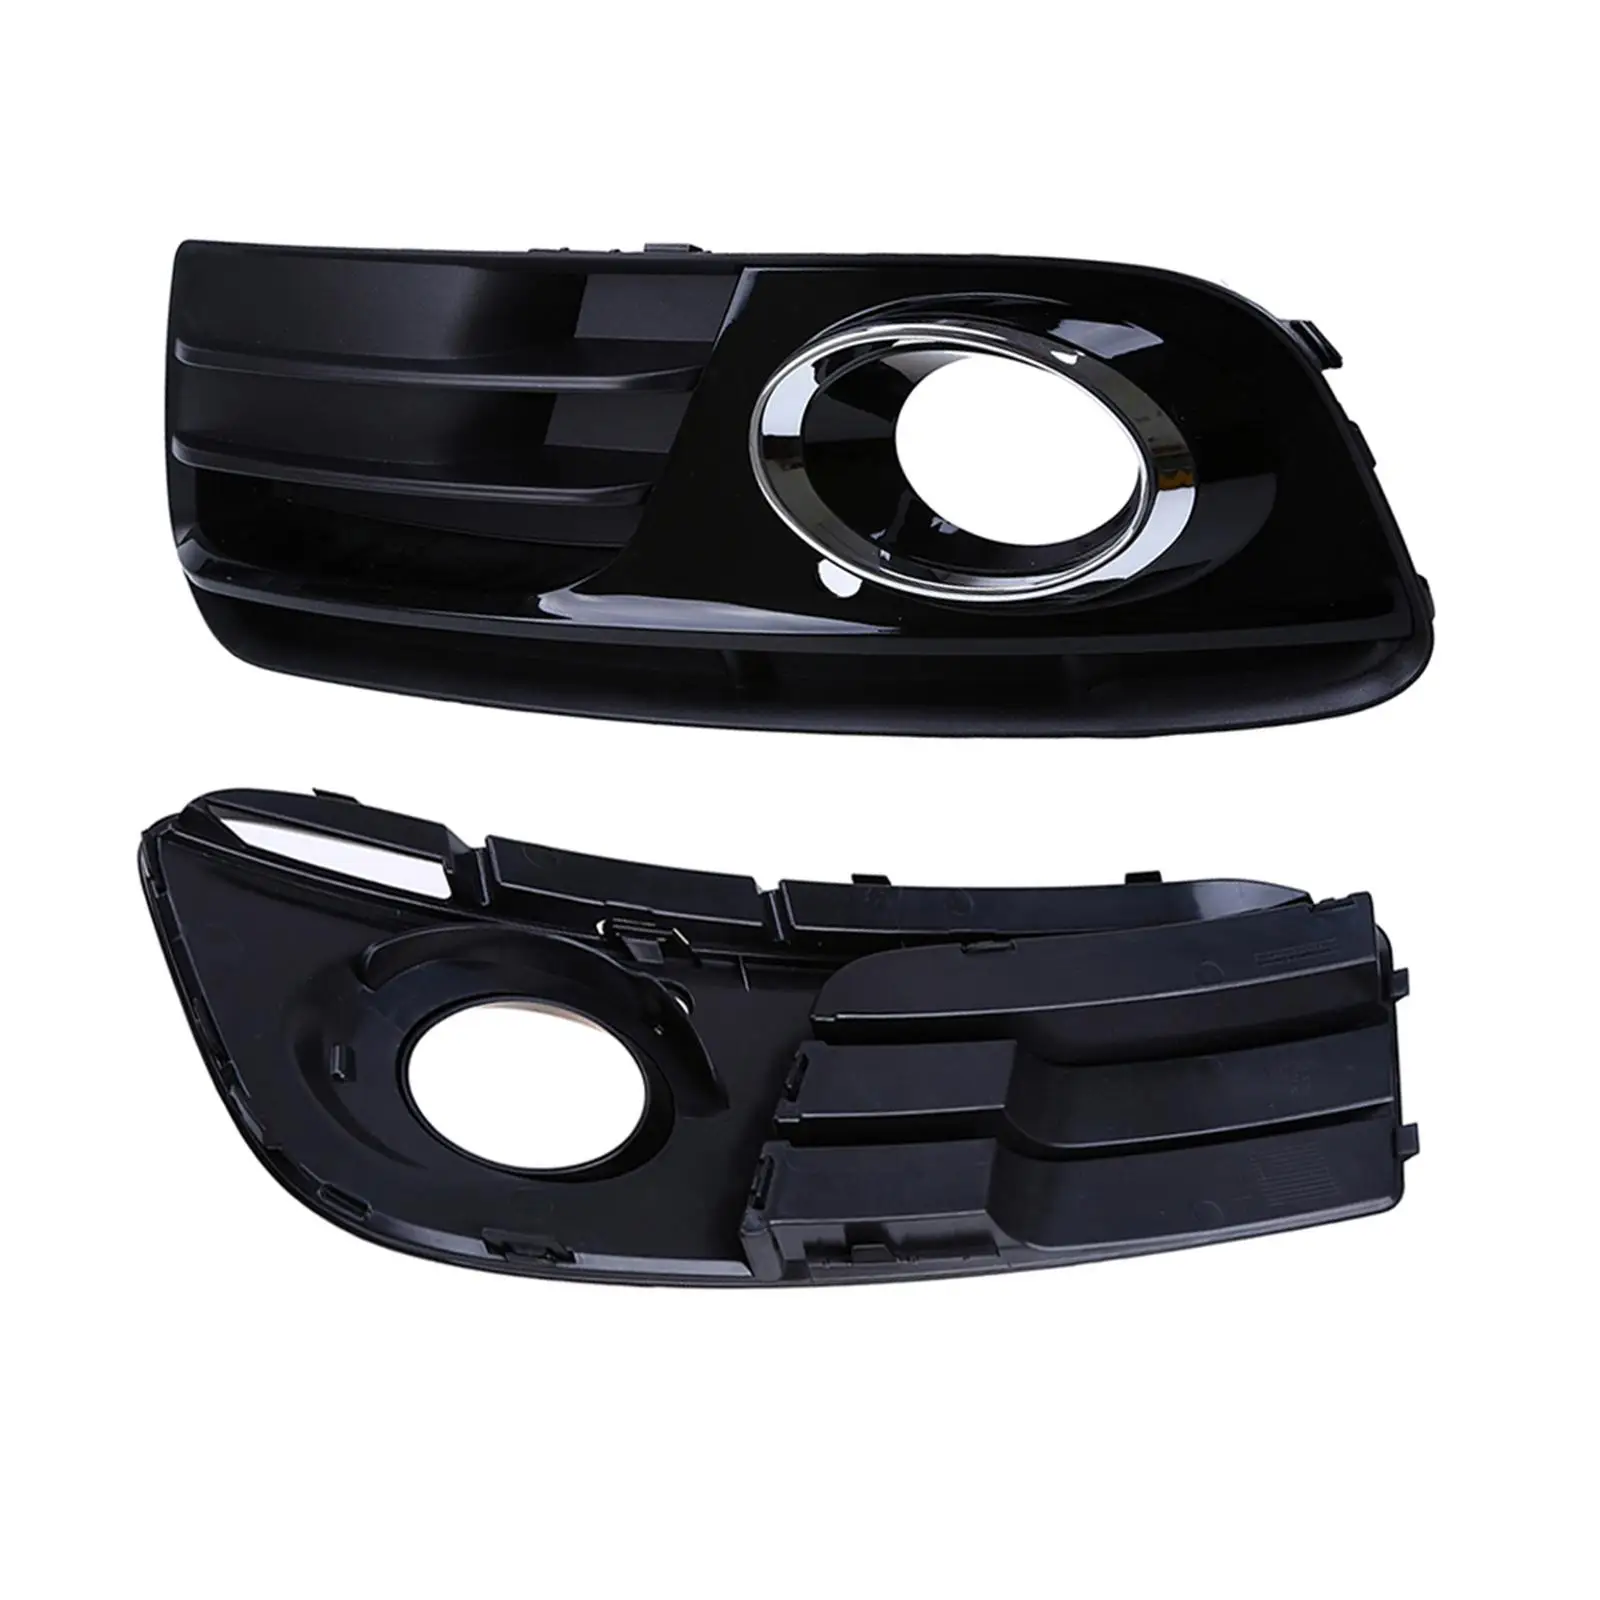 Fog Light Cover Vehicle Replacement 8R0807682 Easy to Install Accessory Durable Professional for Audi Q5 2013-2016